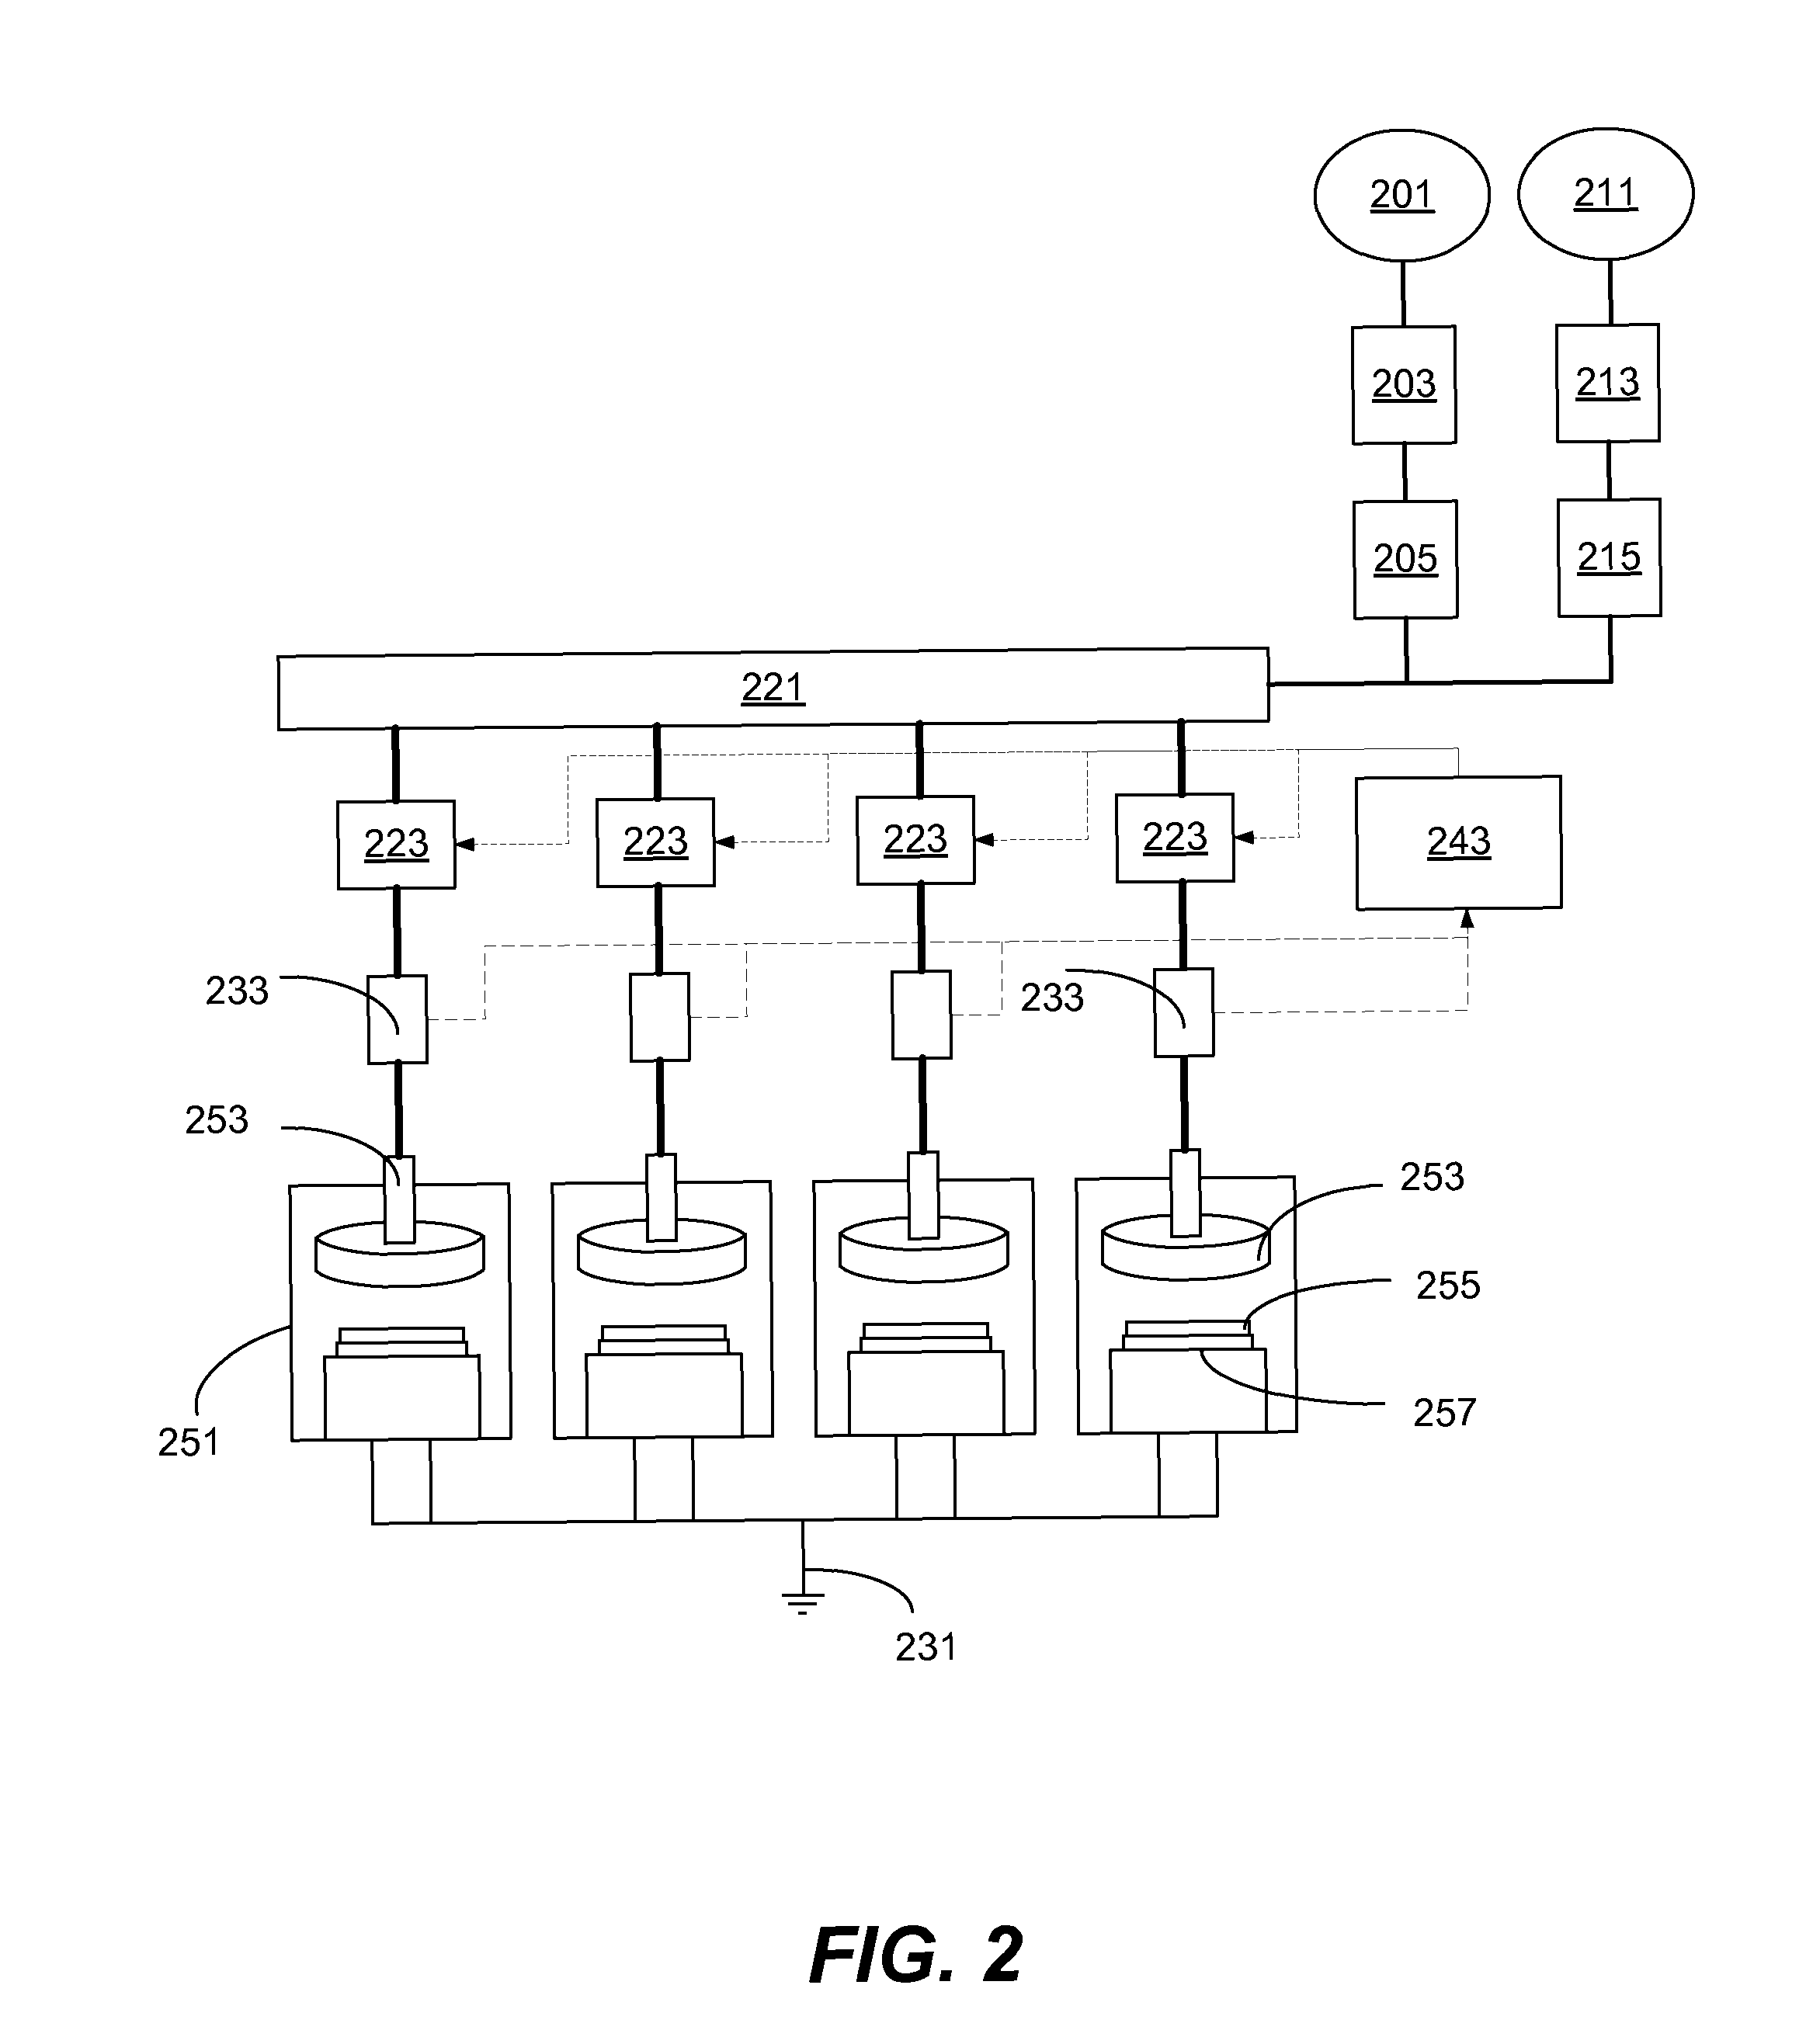 Closed loop control system for RF power balancing of the stations in a multi-station processing tool with shared RF source